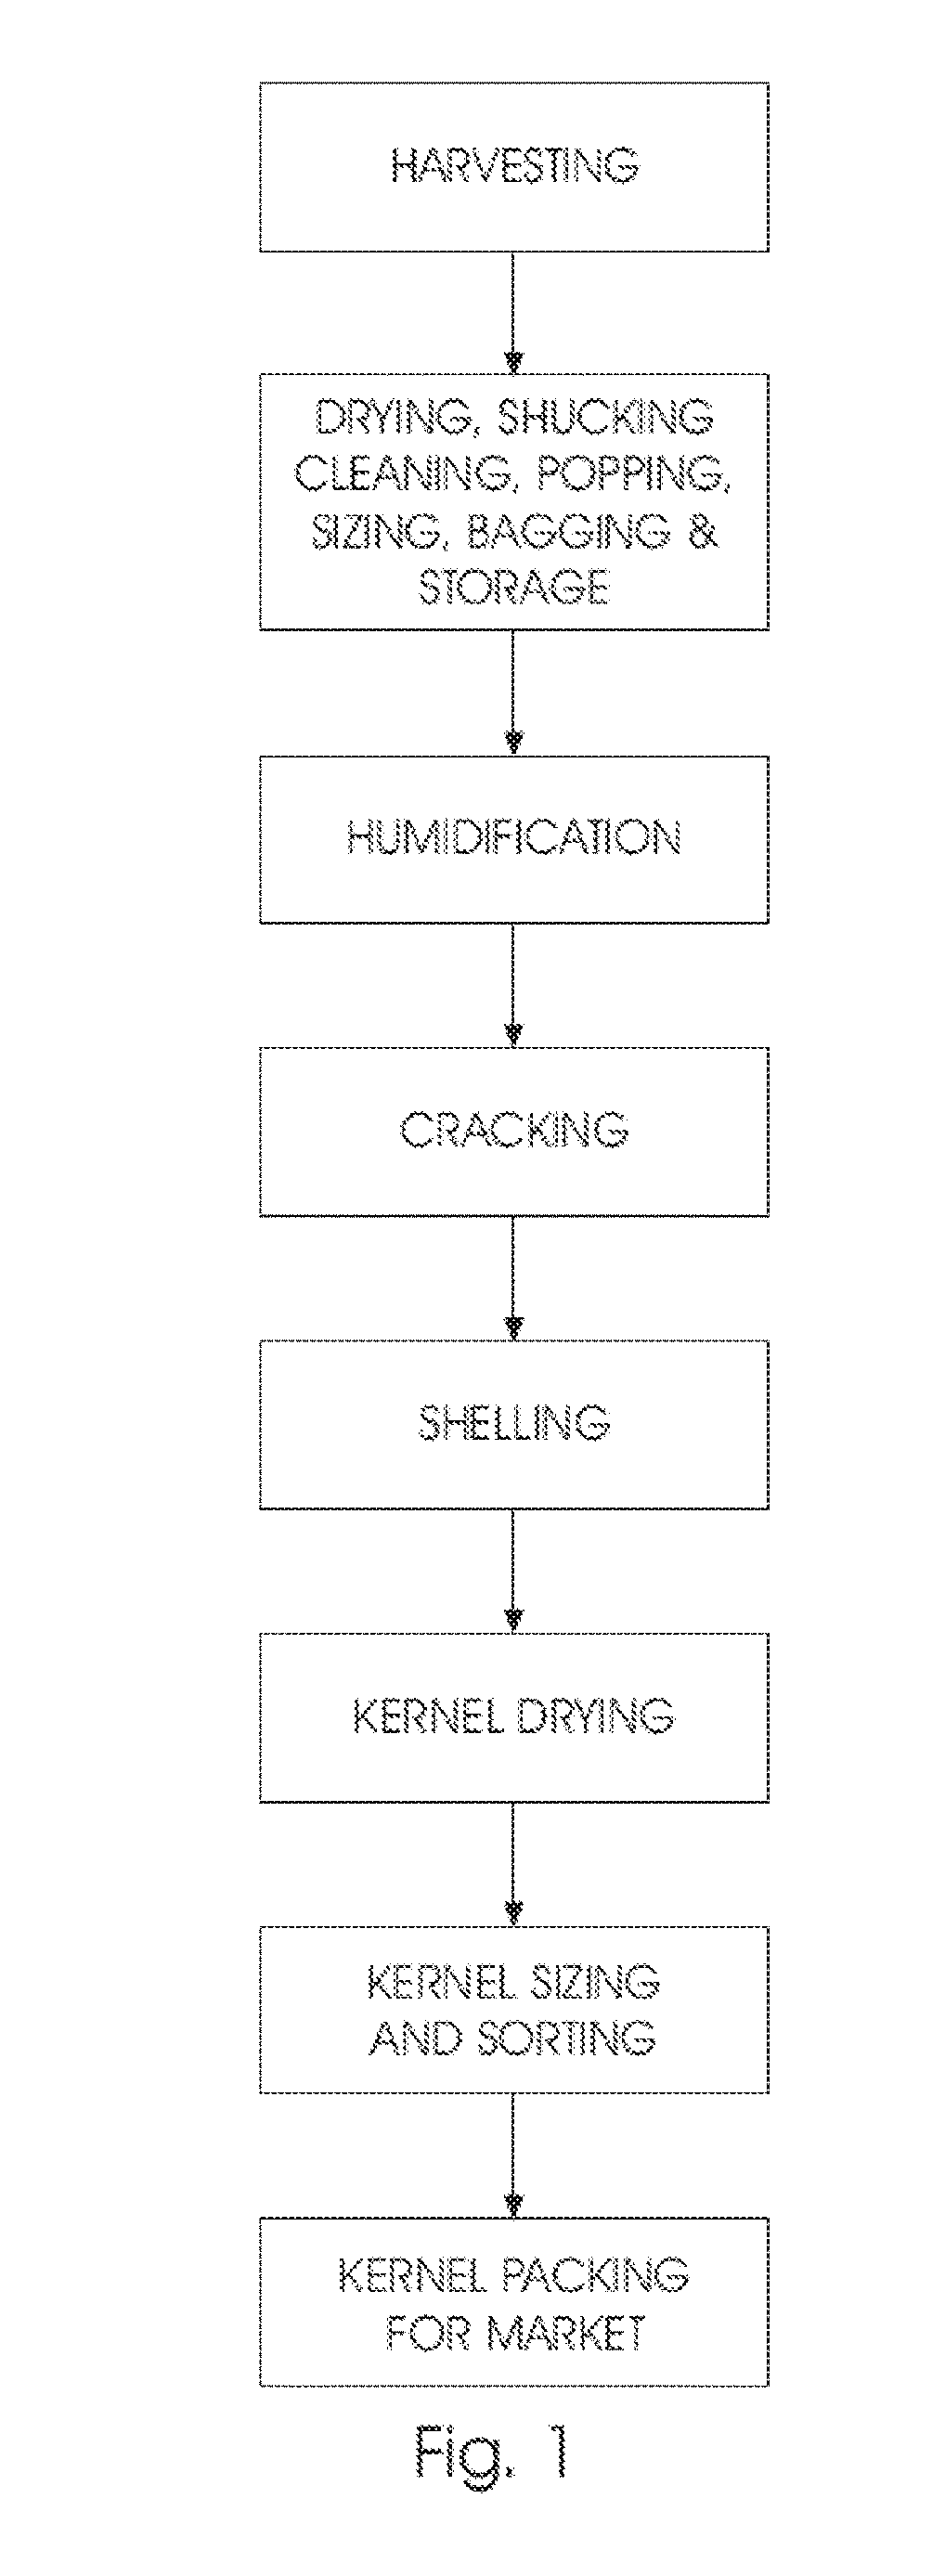 Apparatus and method for cracking stone fruit nuts